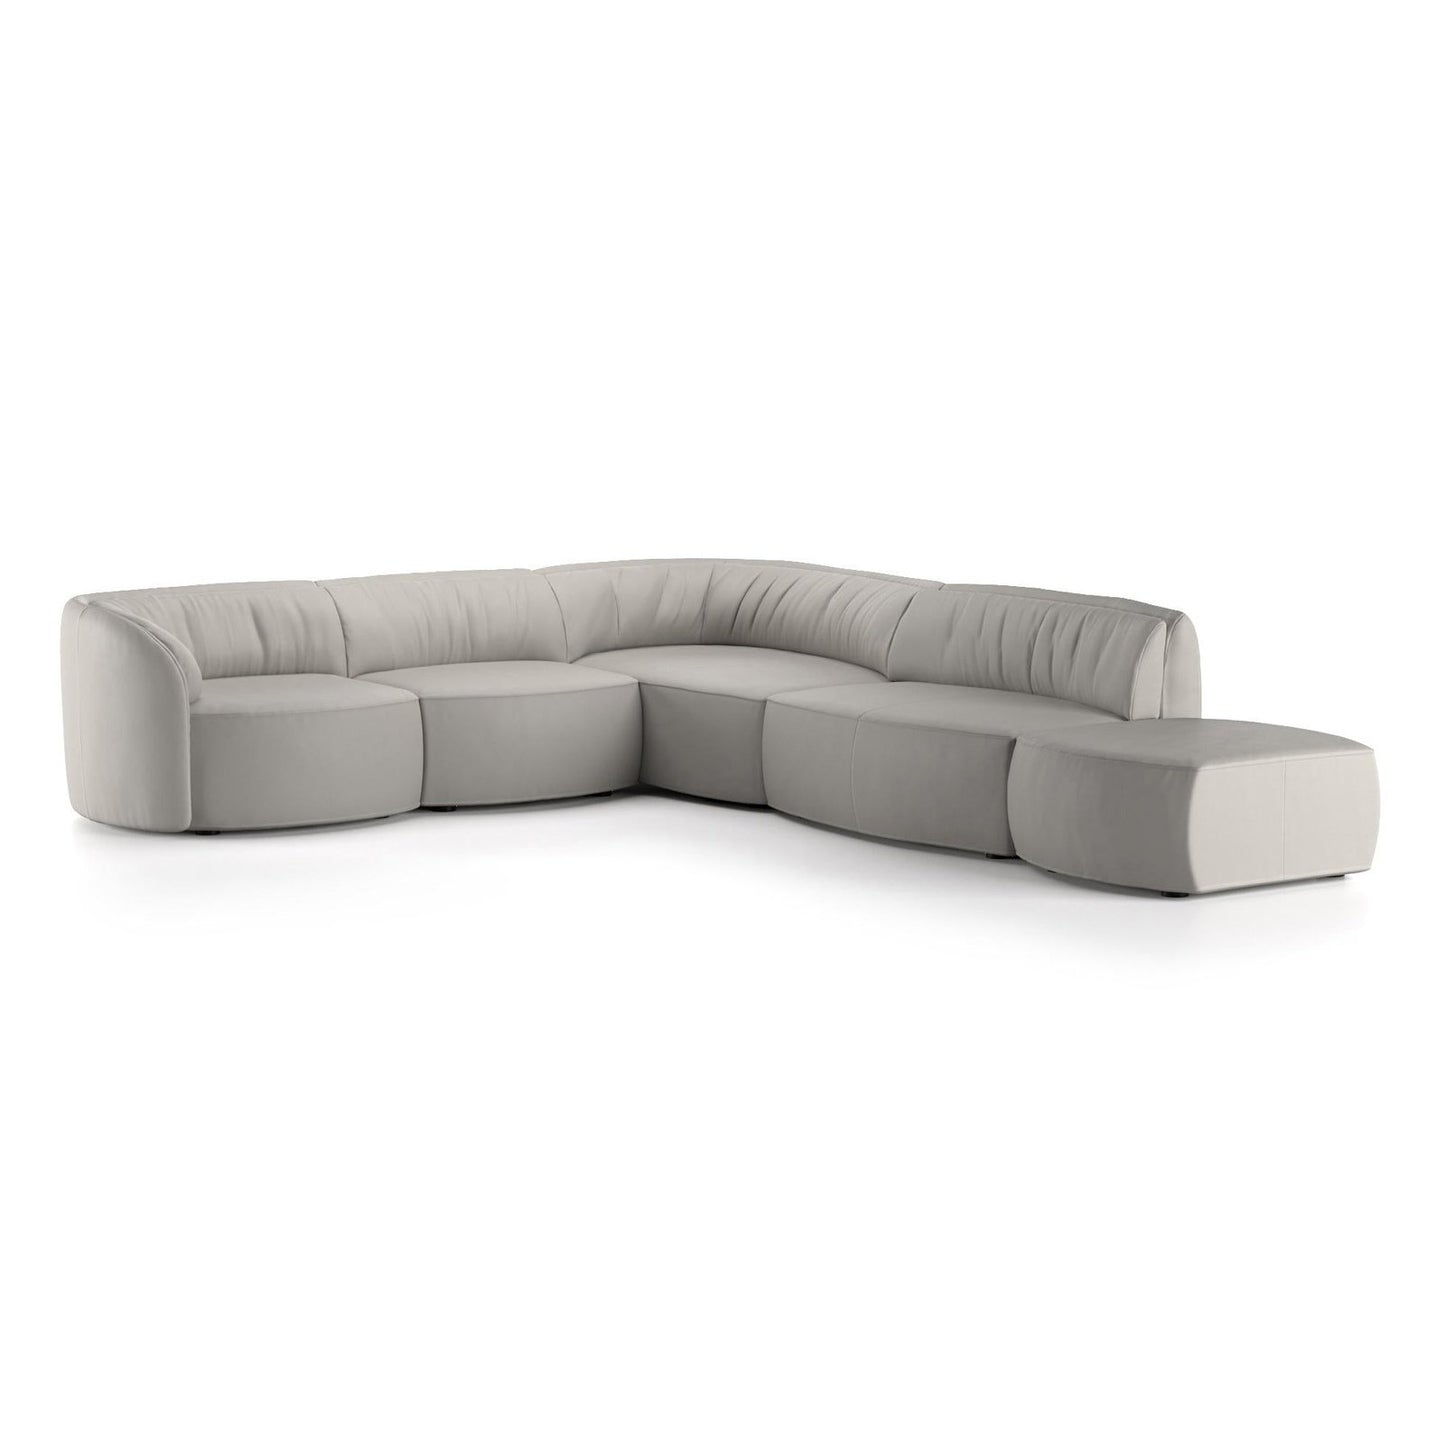 DEEP LIGHT GREY LEATHER SECTIONAL